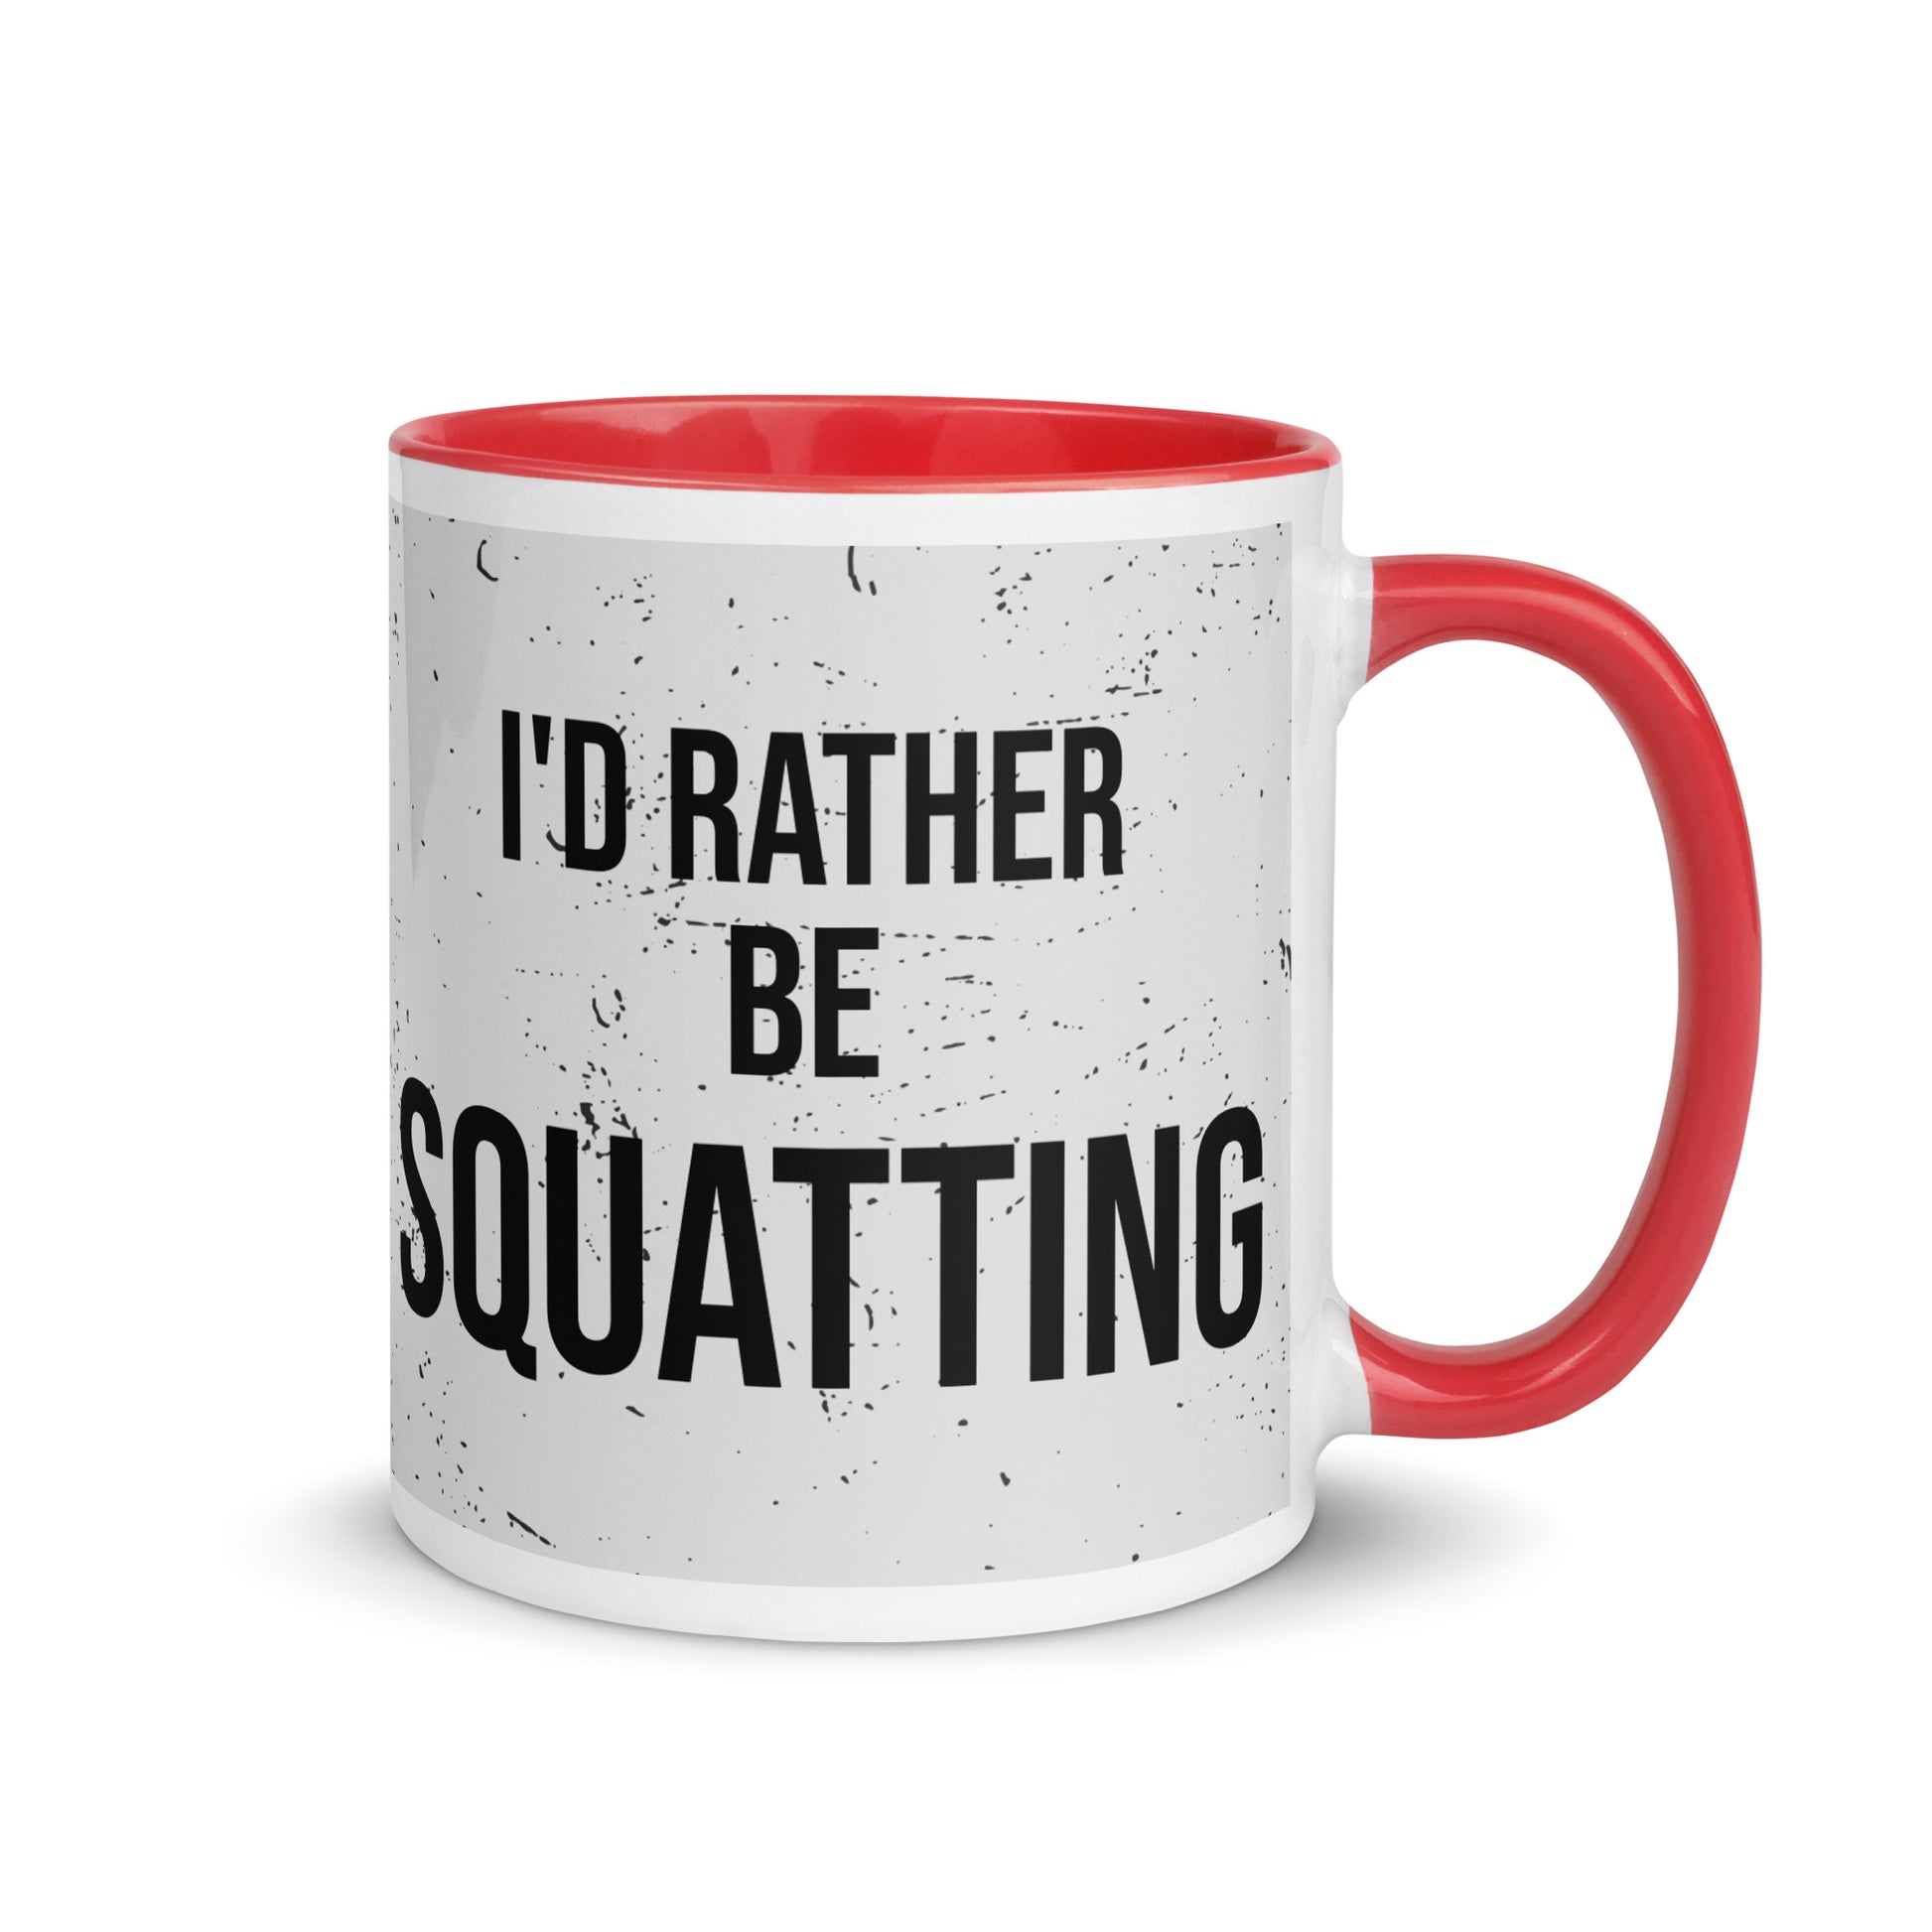 Red handled mug with I'd rather be squatting written on it, across a grey splatter background. A gift for someone who loves the gym.